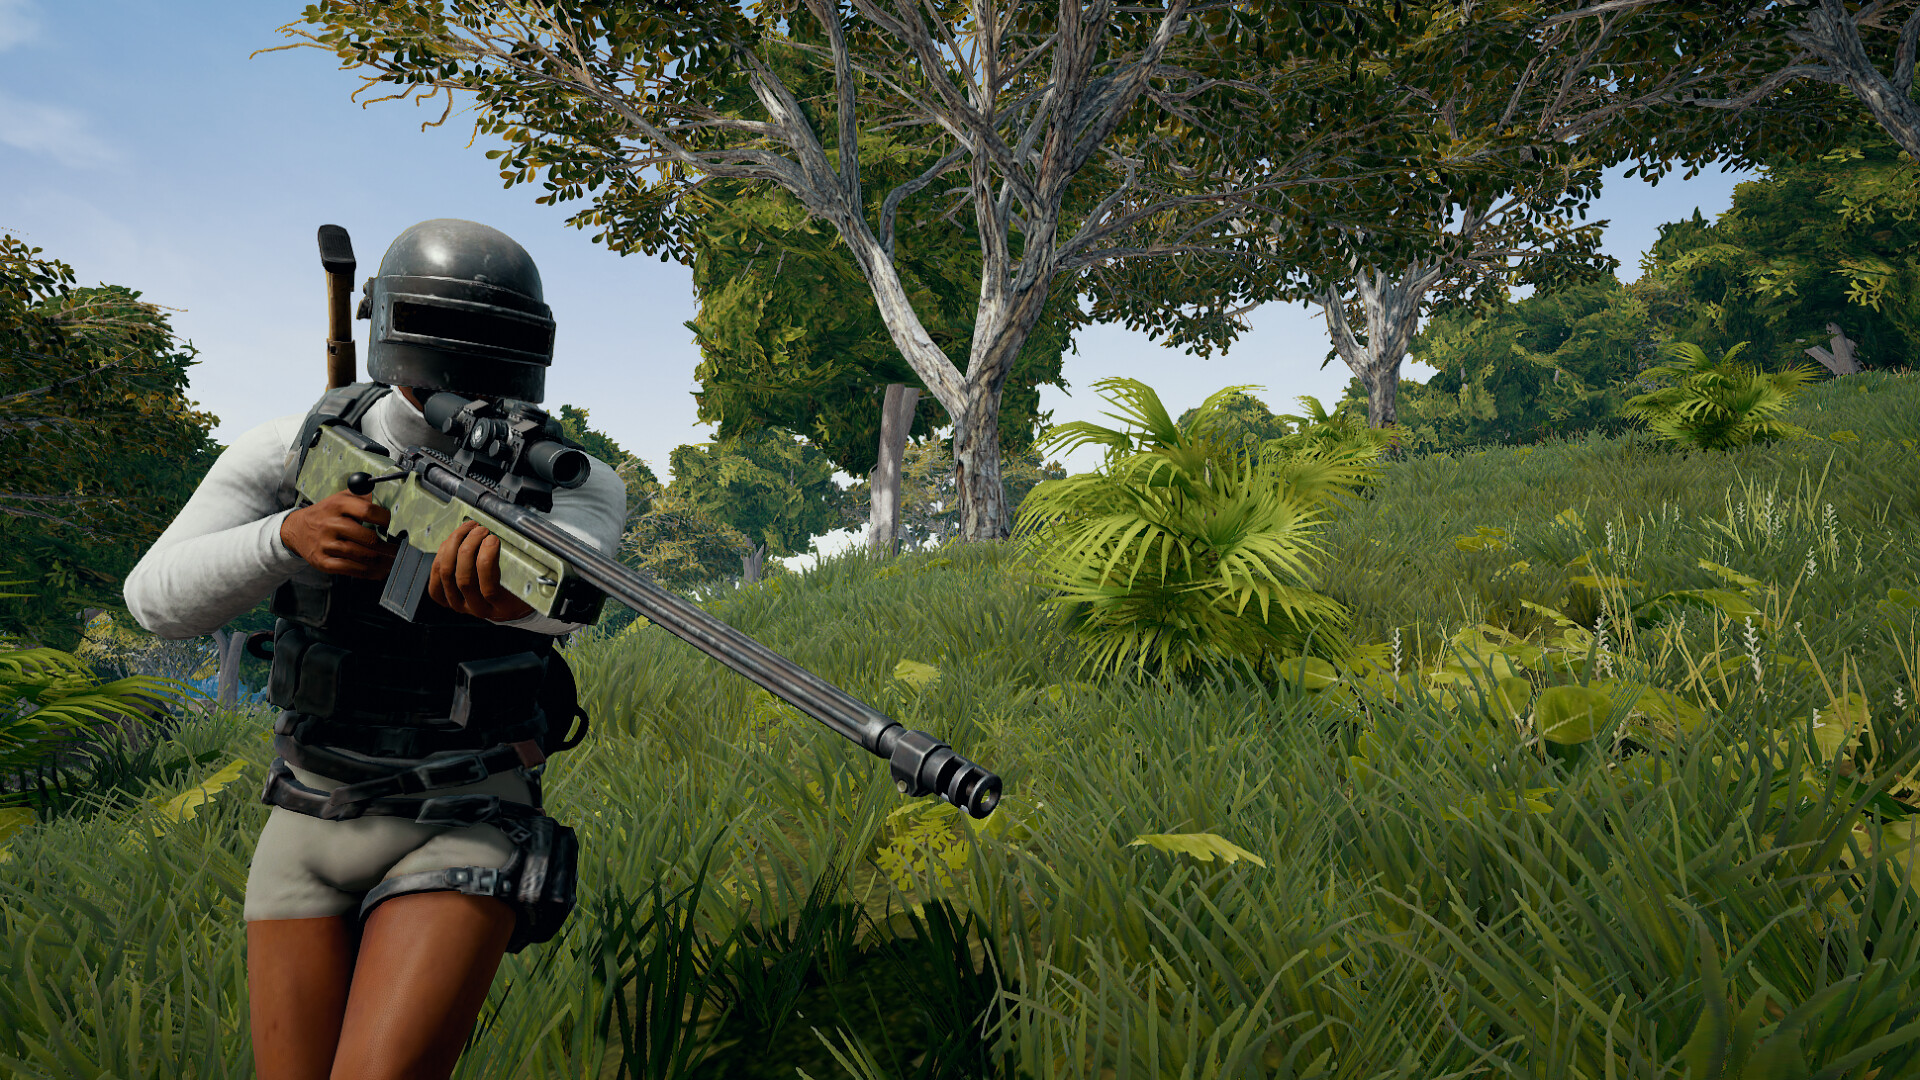 Pubg Will Now Impose A 10 Year Ban On Any Player Caught Cheating